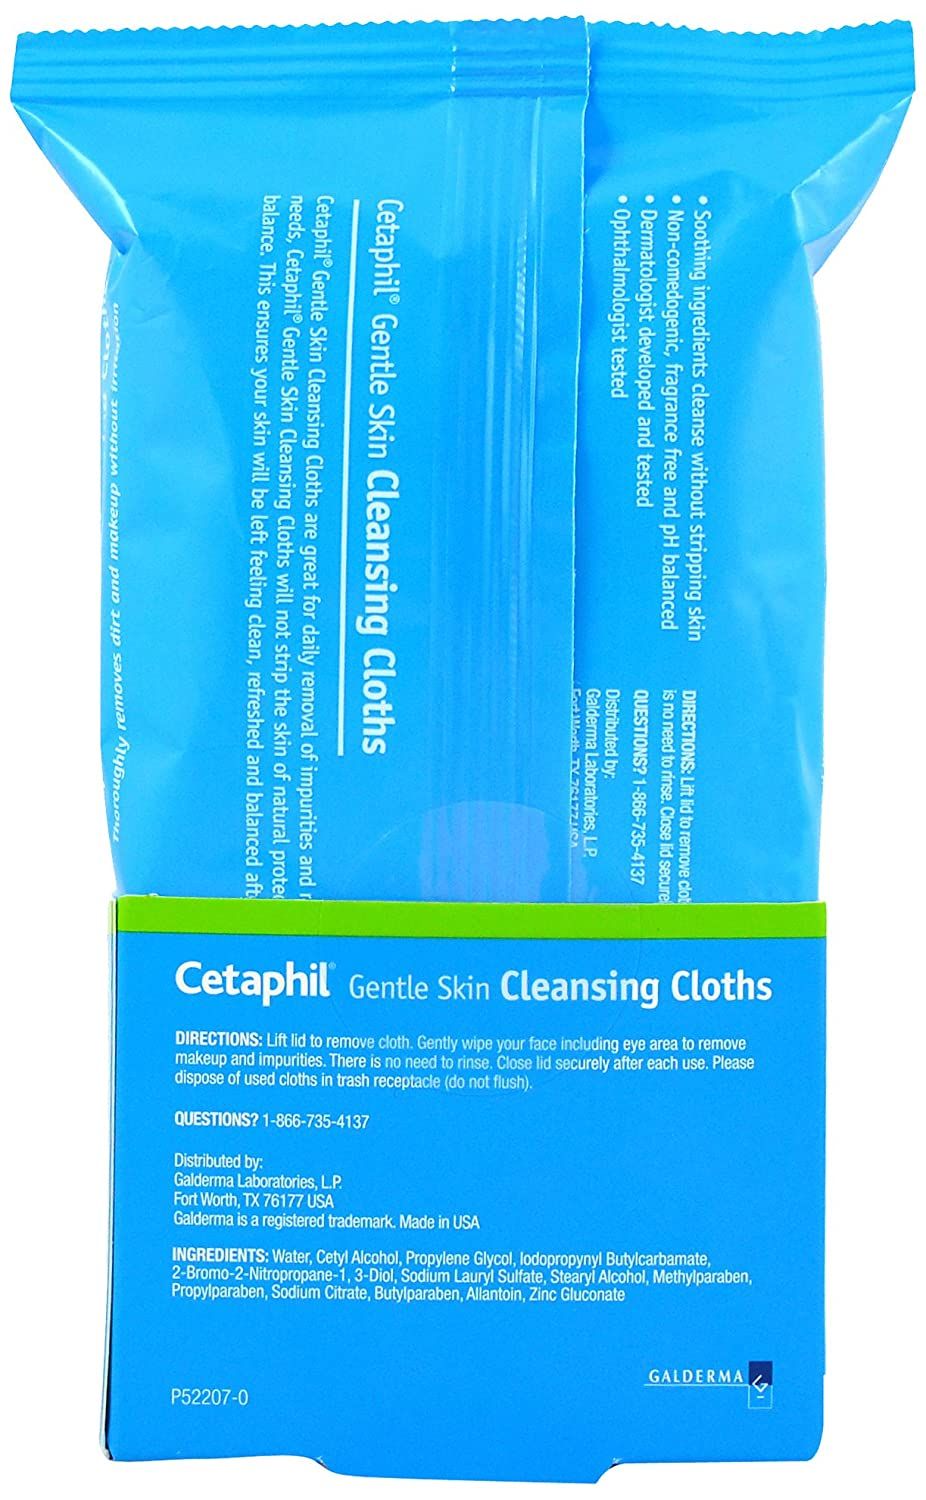 DISCCetaphil Gentle Skin Cleansing Cloths, Unscented - 25 ct